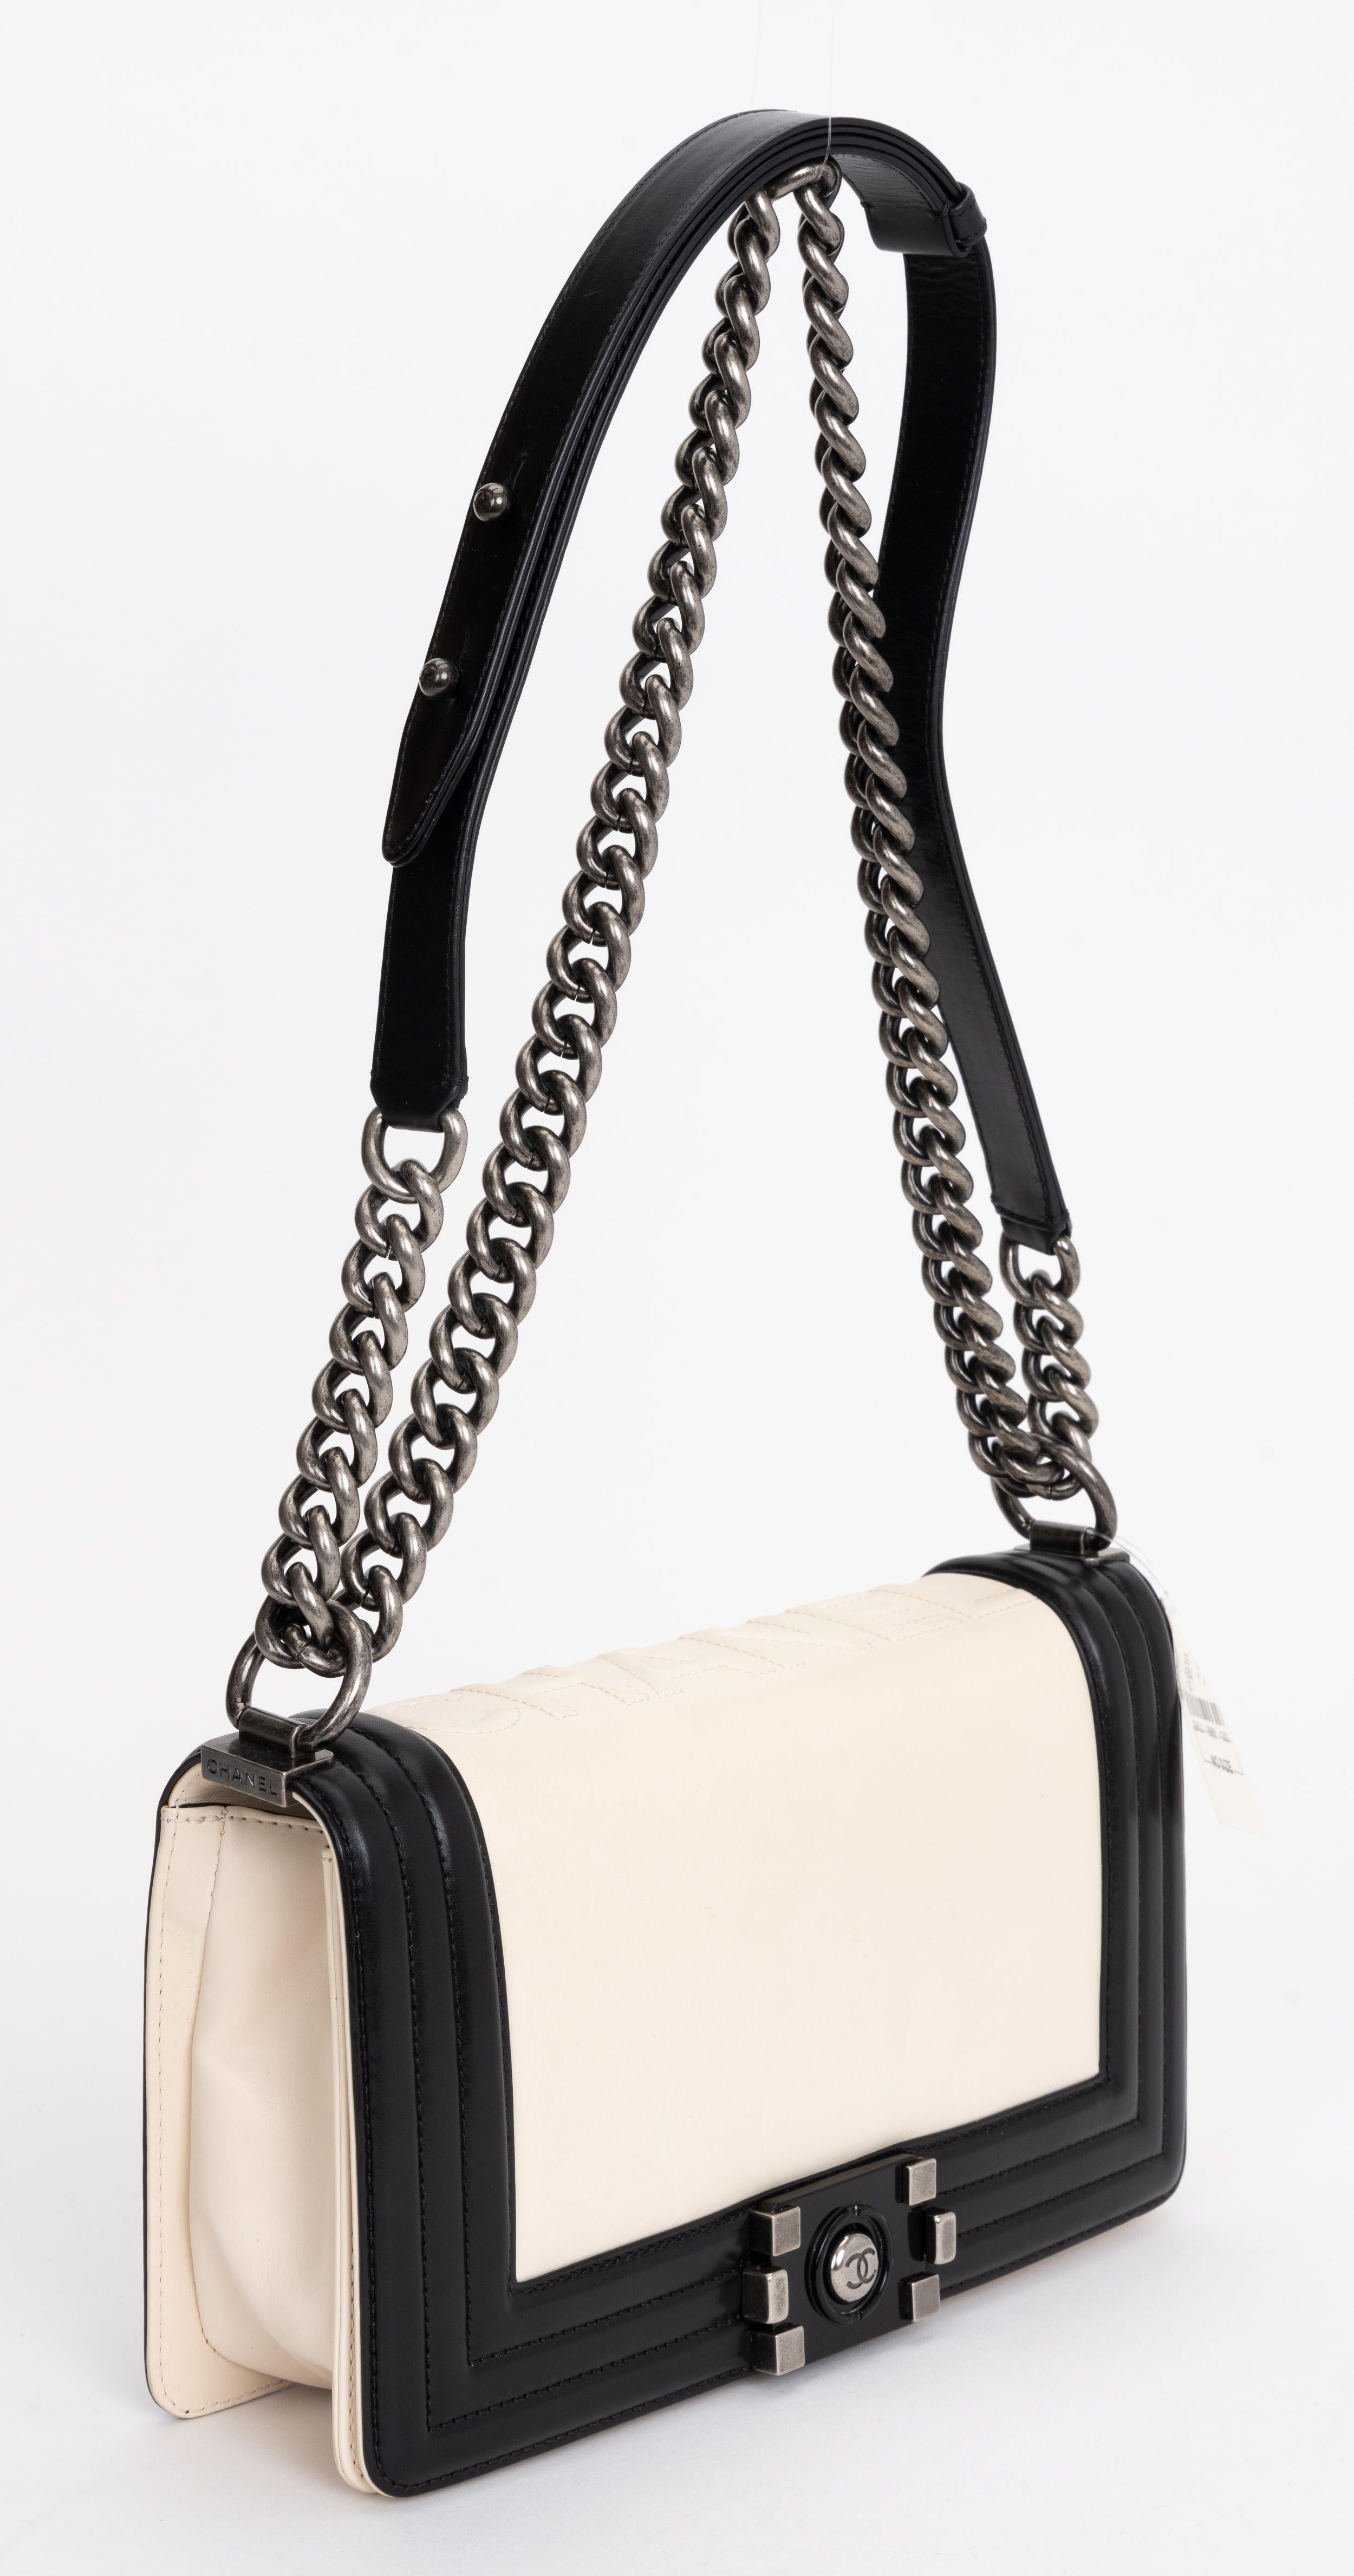 The Chanel Glazed Calfskin Boy Flap bag features smooth leather in Black and White. The aged silver chain shoulder strap makes the bag versatile. Includes patch pocket in the interior. The shoulder drop 19